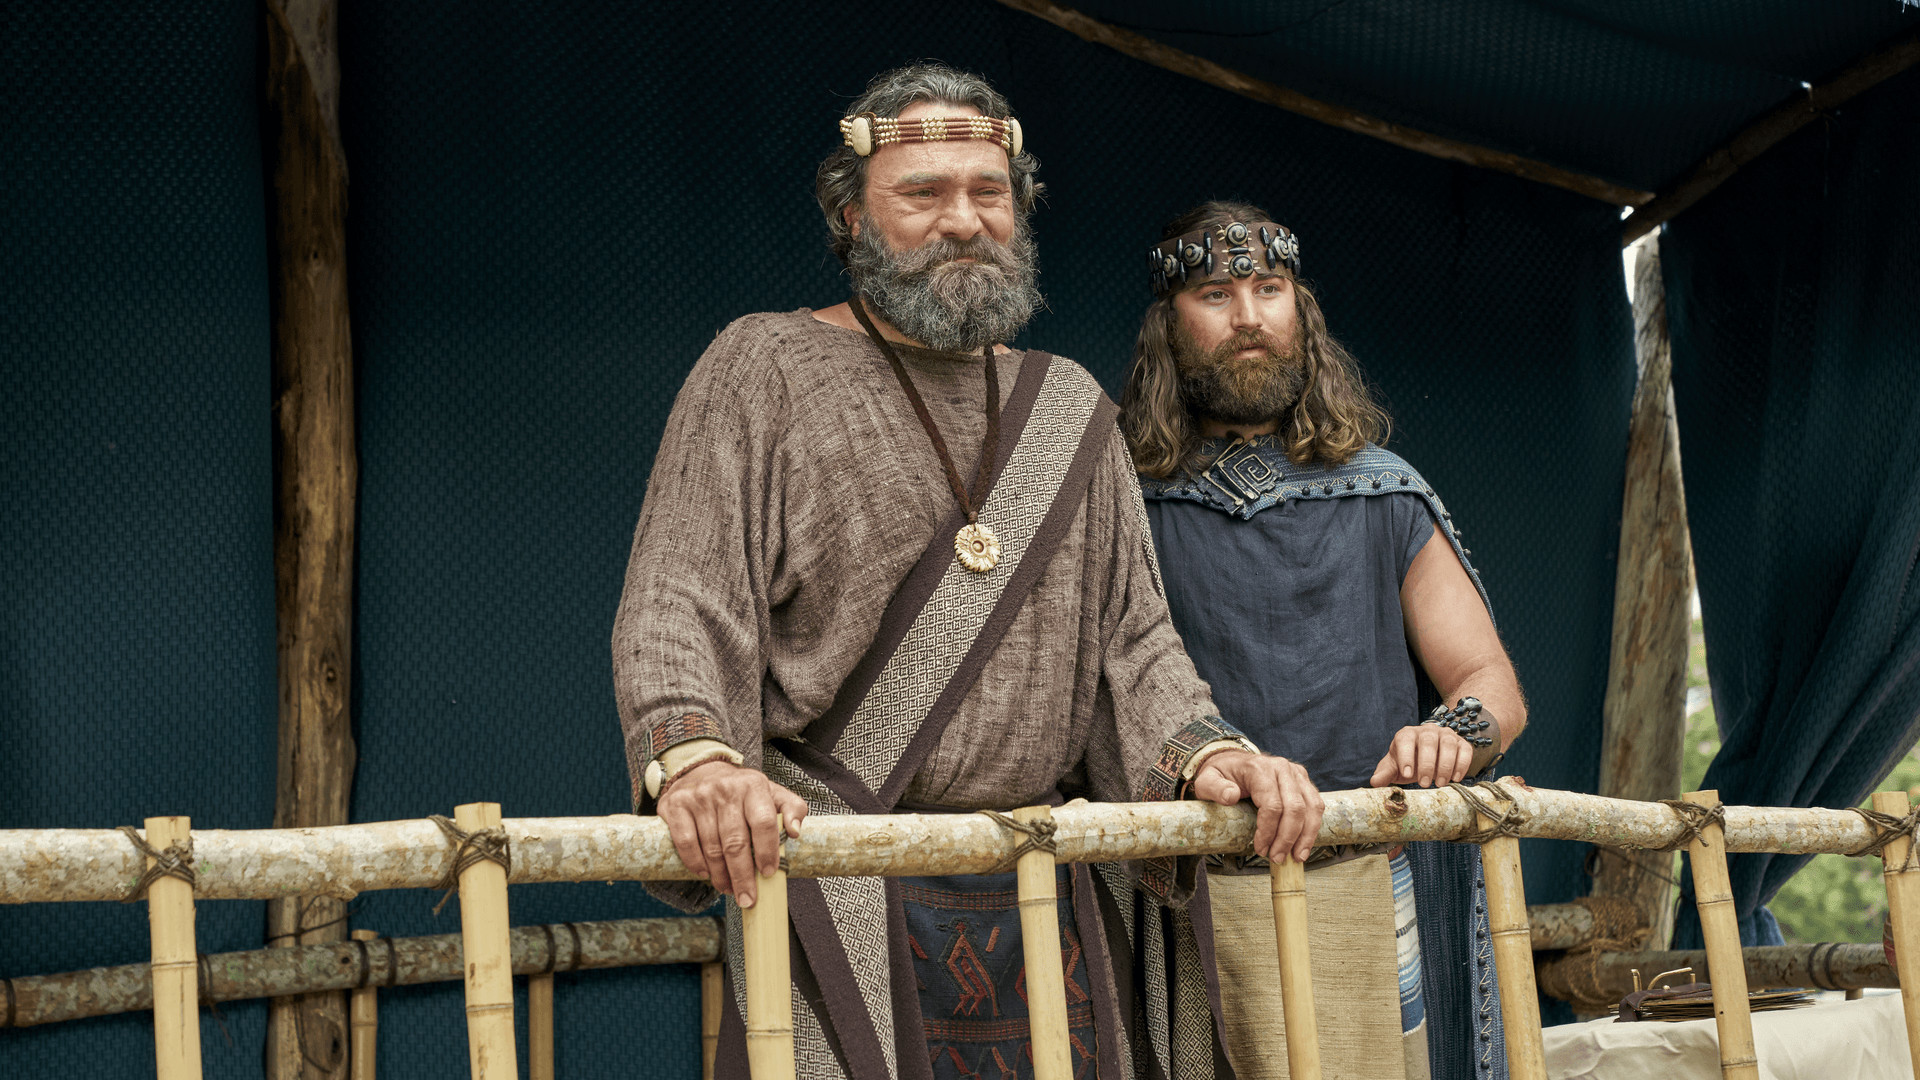 King Benjamin and Mosiah stand on a tower in this still from the Book of Mormon Videos of The Church of Jesus Christ of Latter-day Saints.